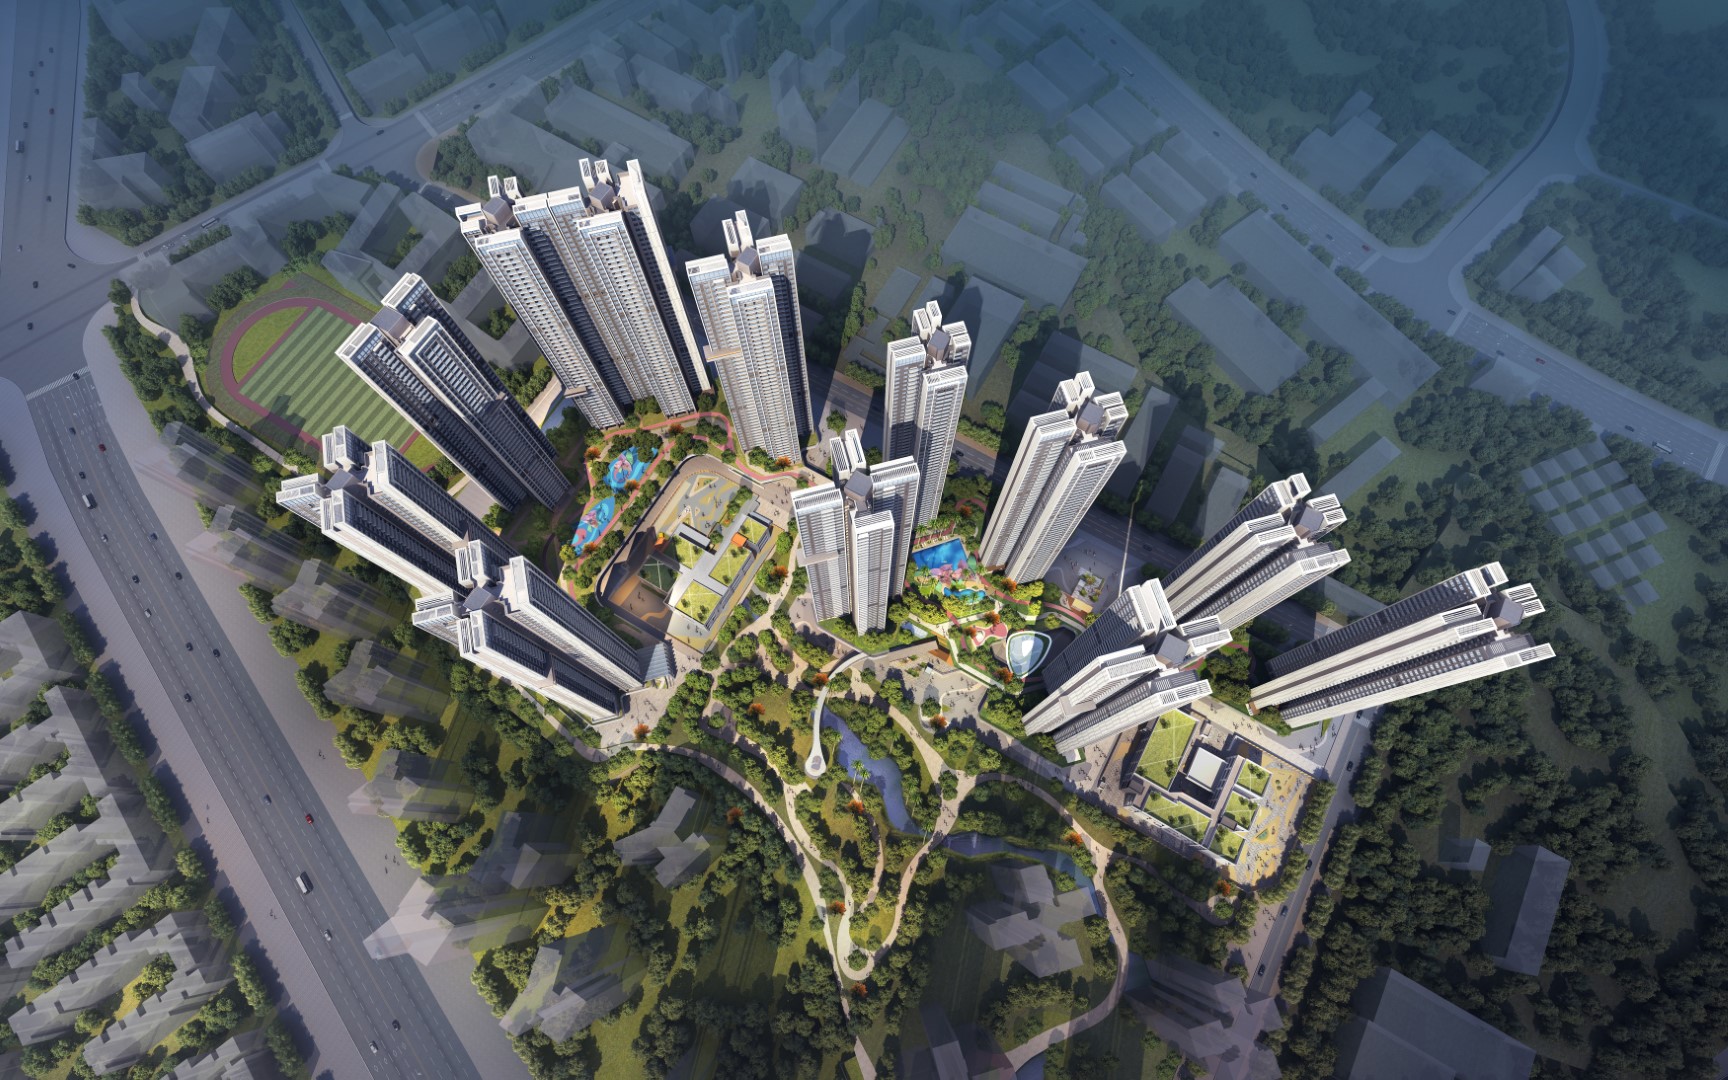 Shenzhen Longhua Talent Housing will provide high-quality and affordable housing